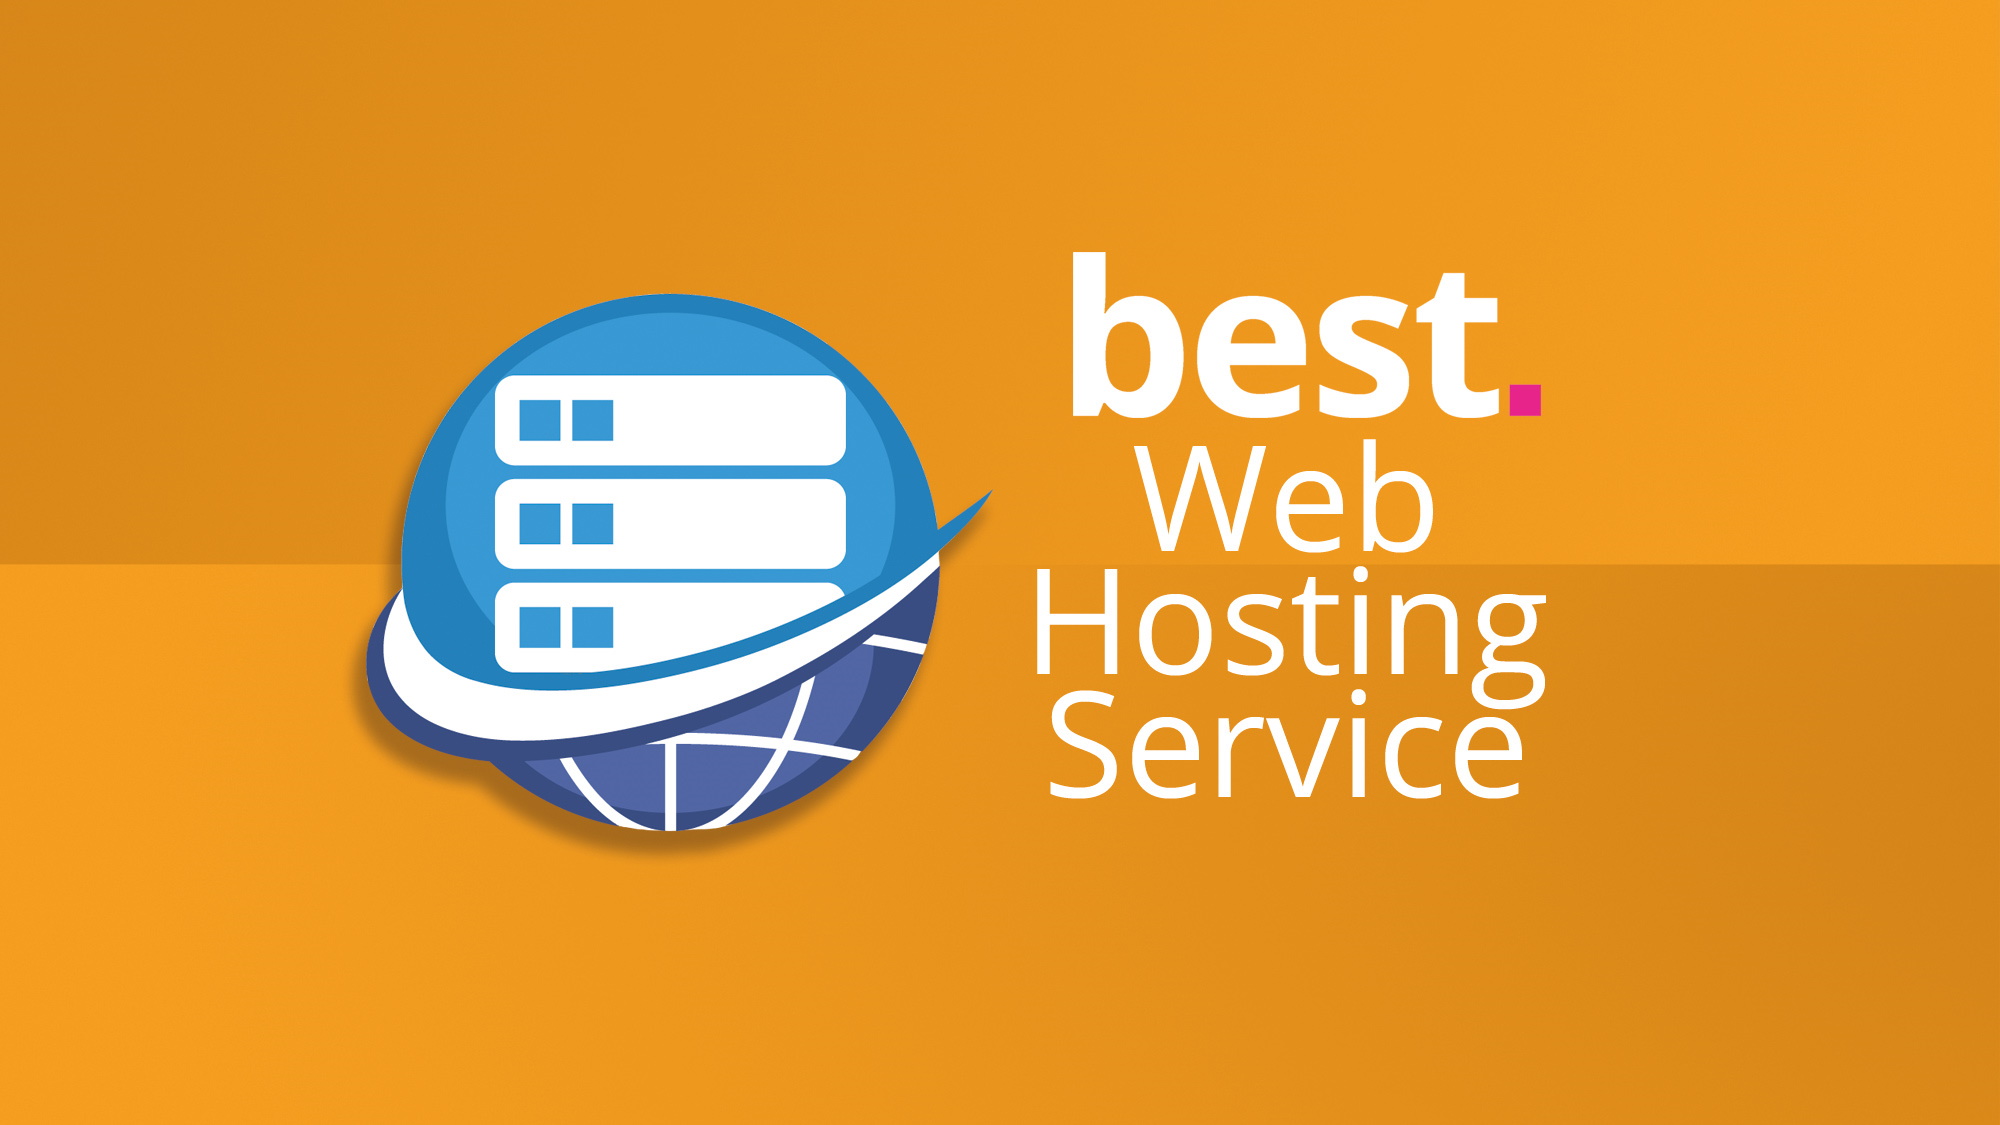 5 Giants Of Web Hosting: What Makes Them Great Web Hosts